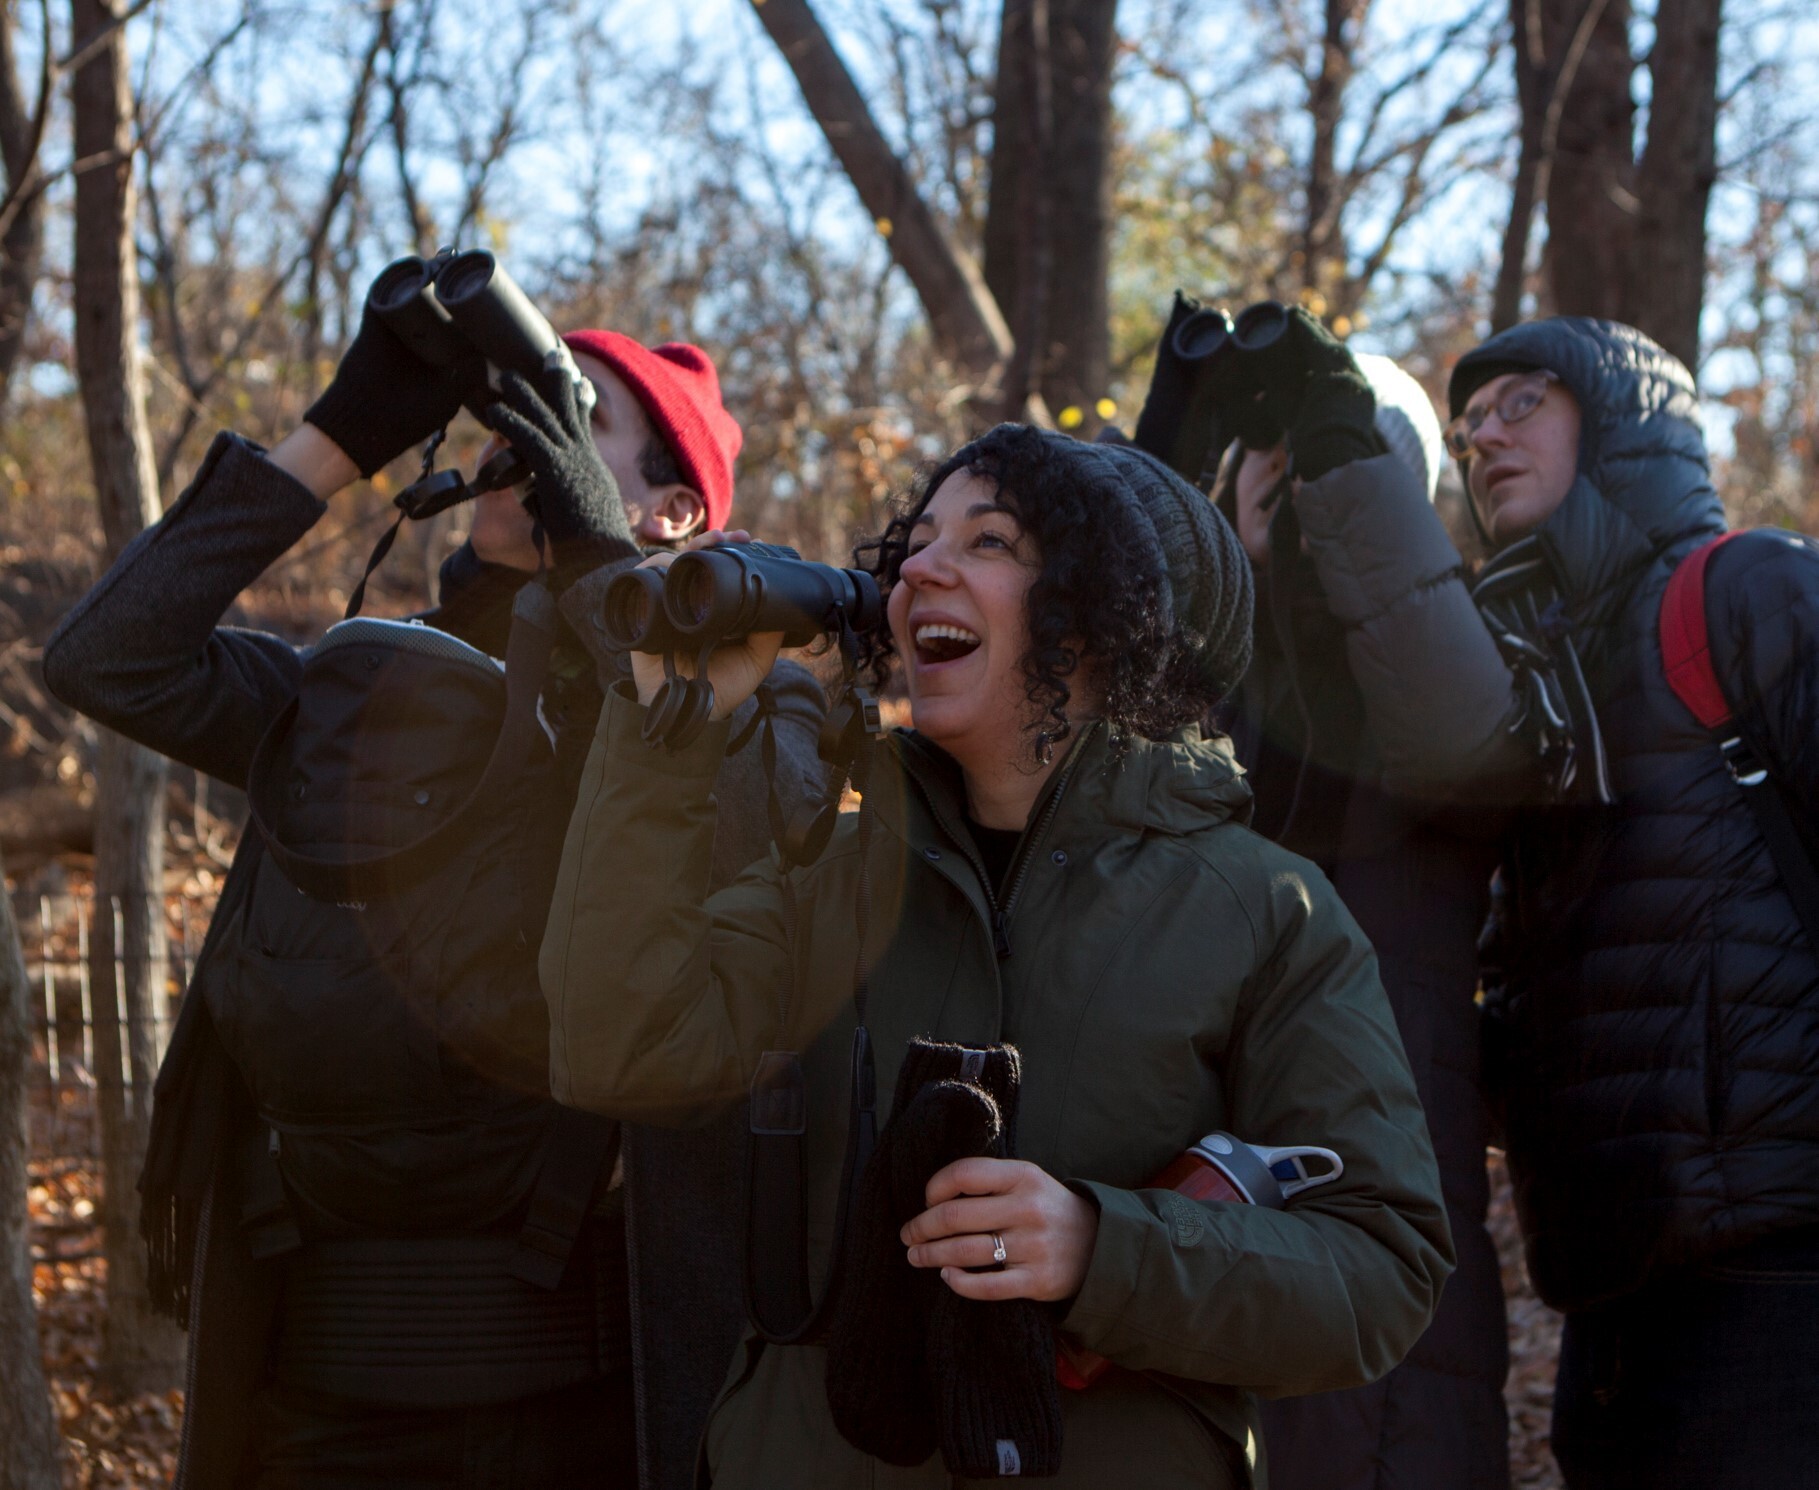 Birders are easily recognized by their equipment. Photo: Camilla Cerea/National Audubon